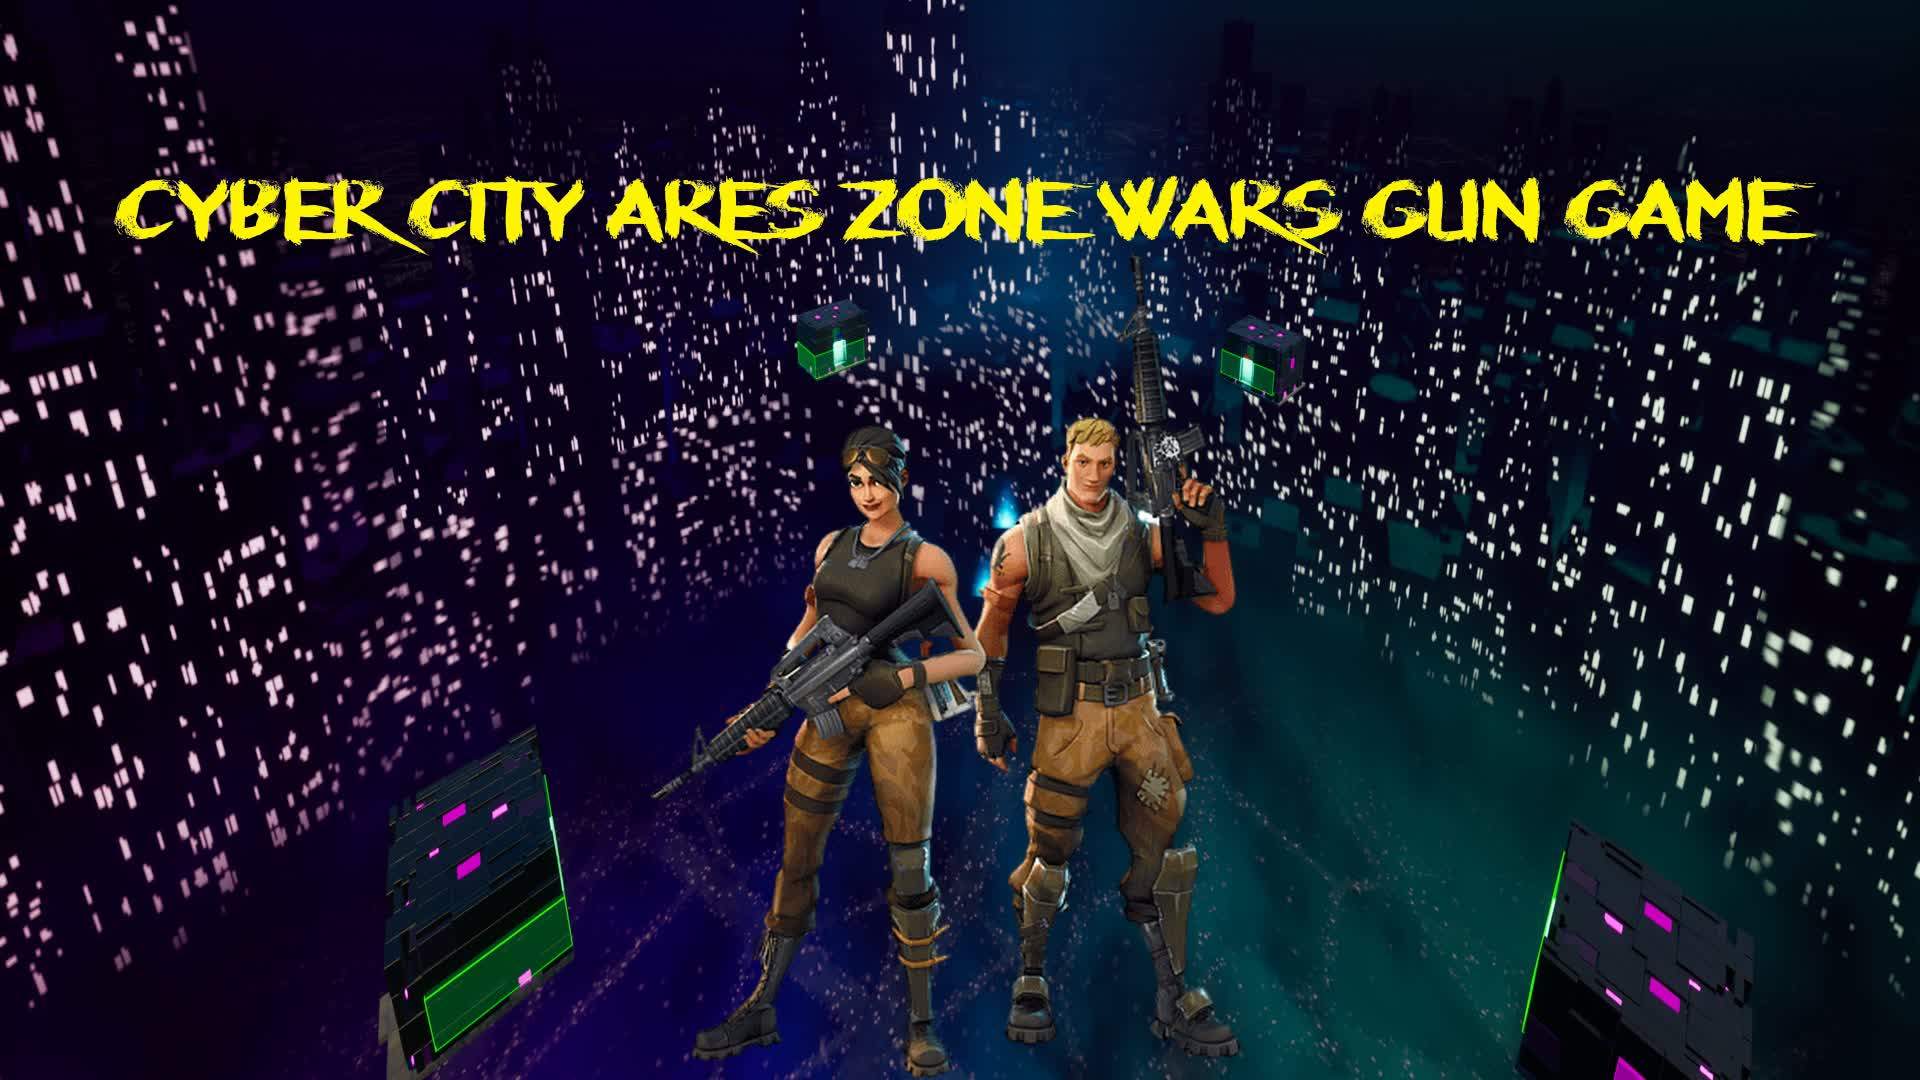 Cyber City Ares Zone Wars Gun Game